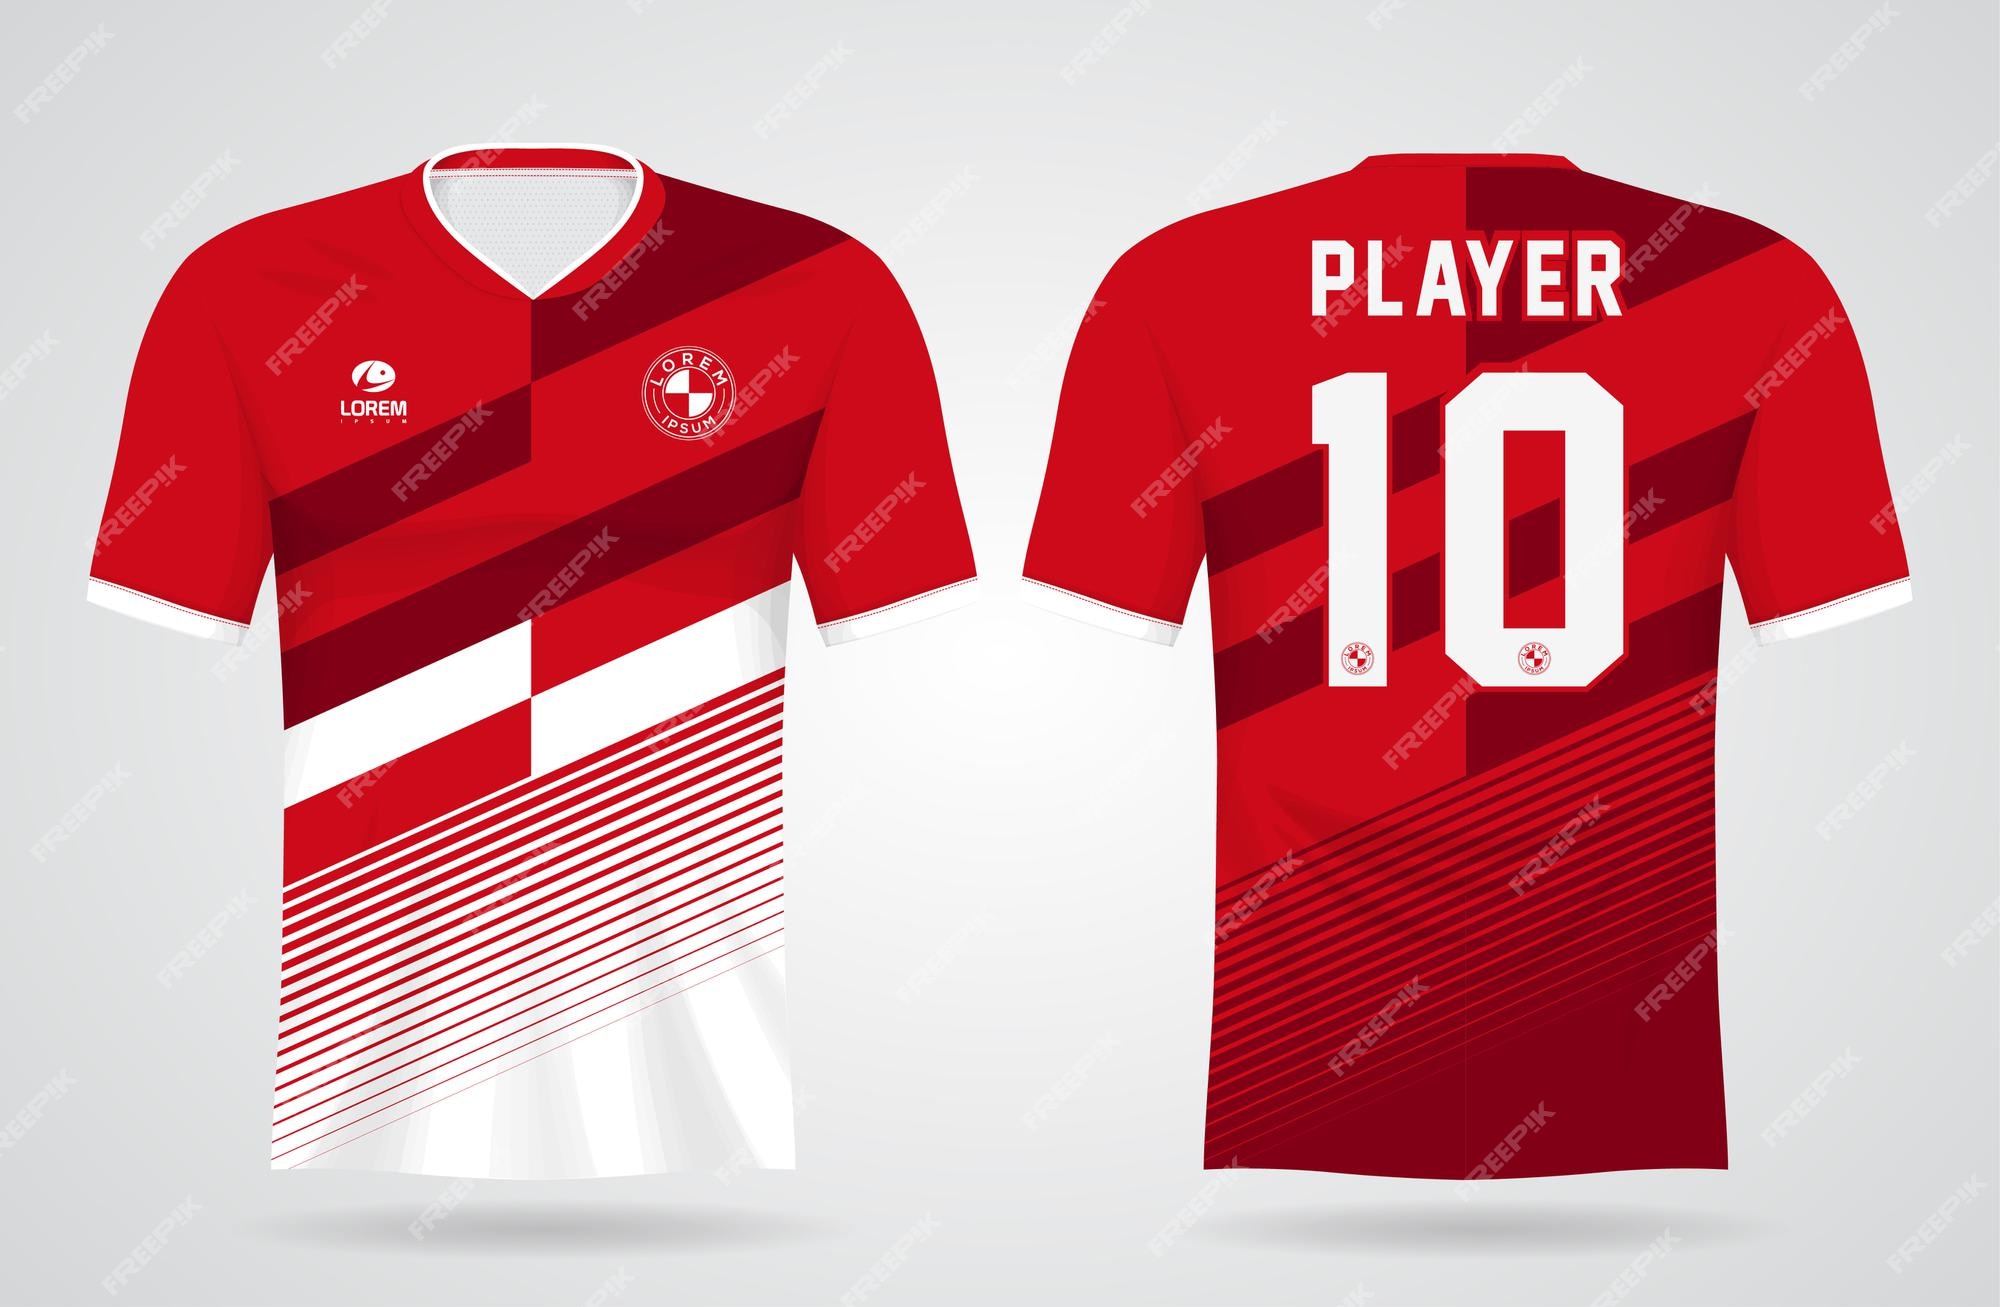 Premium Vector | Red white sports jersey template for team uniforms and ...